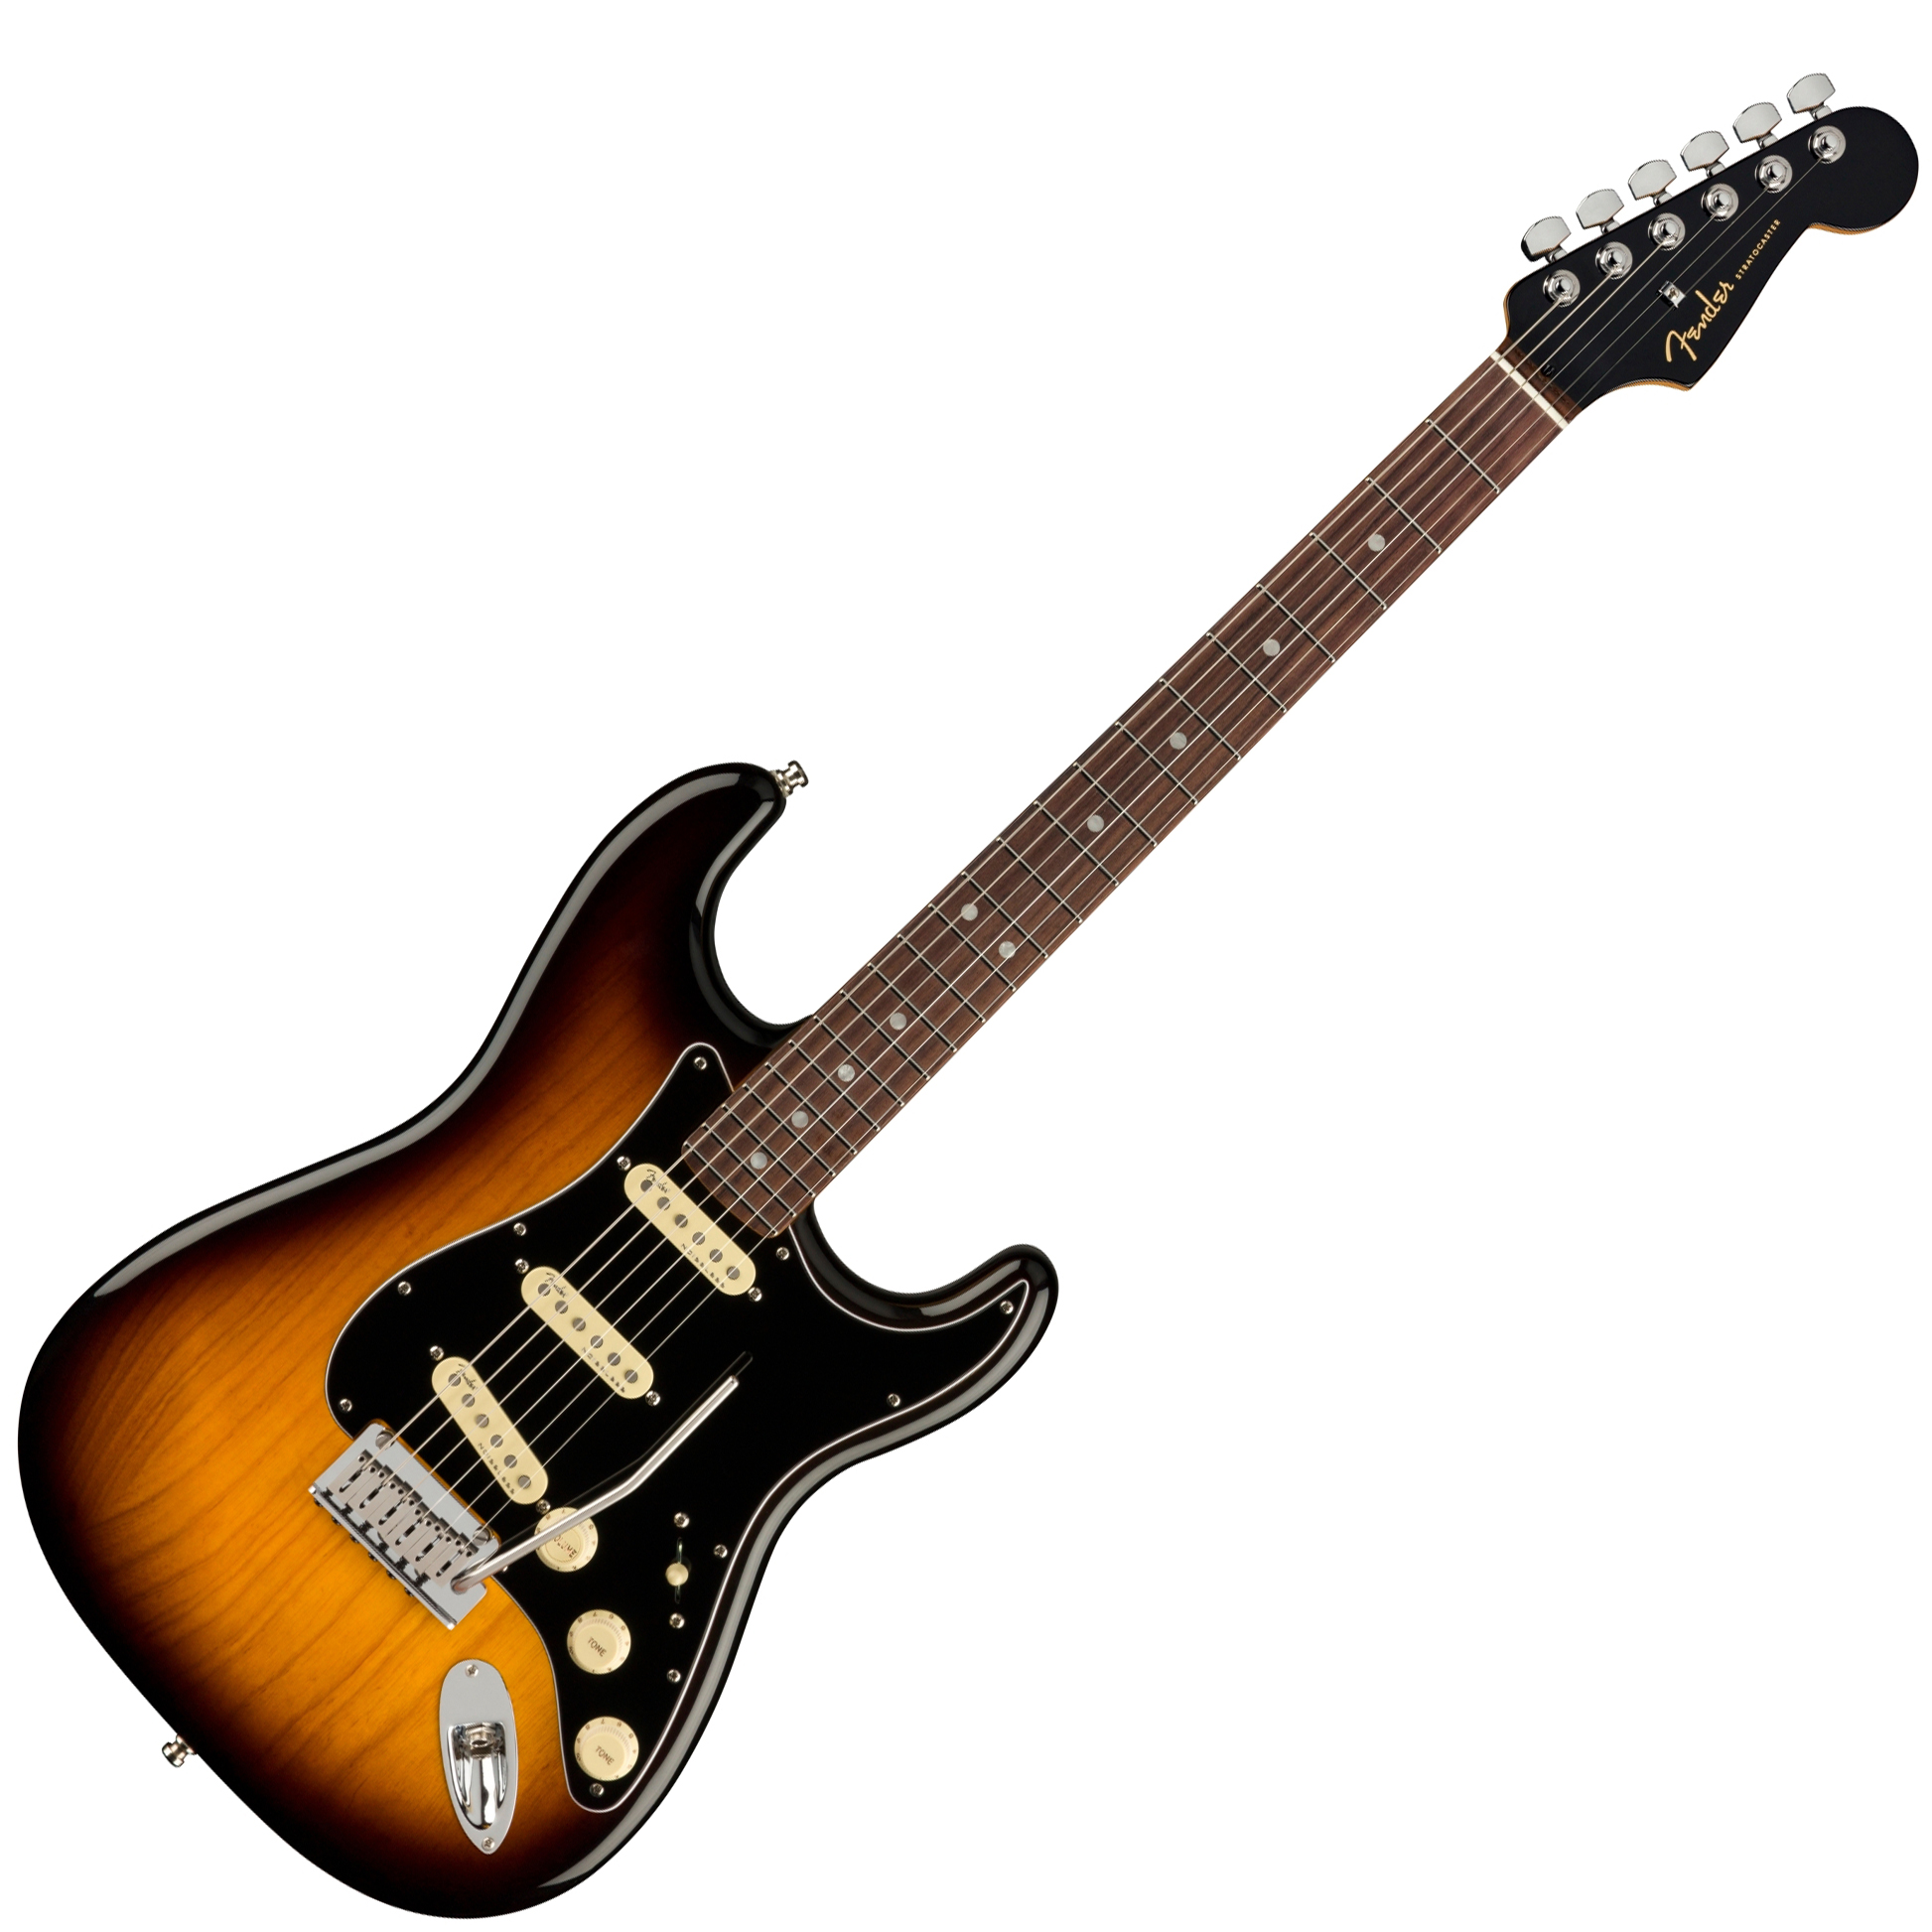 AMERICAN ULTRA LUXE STRATOCASTER: